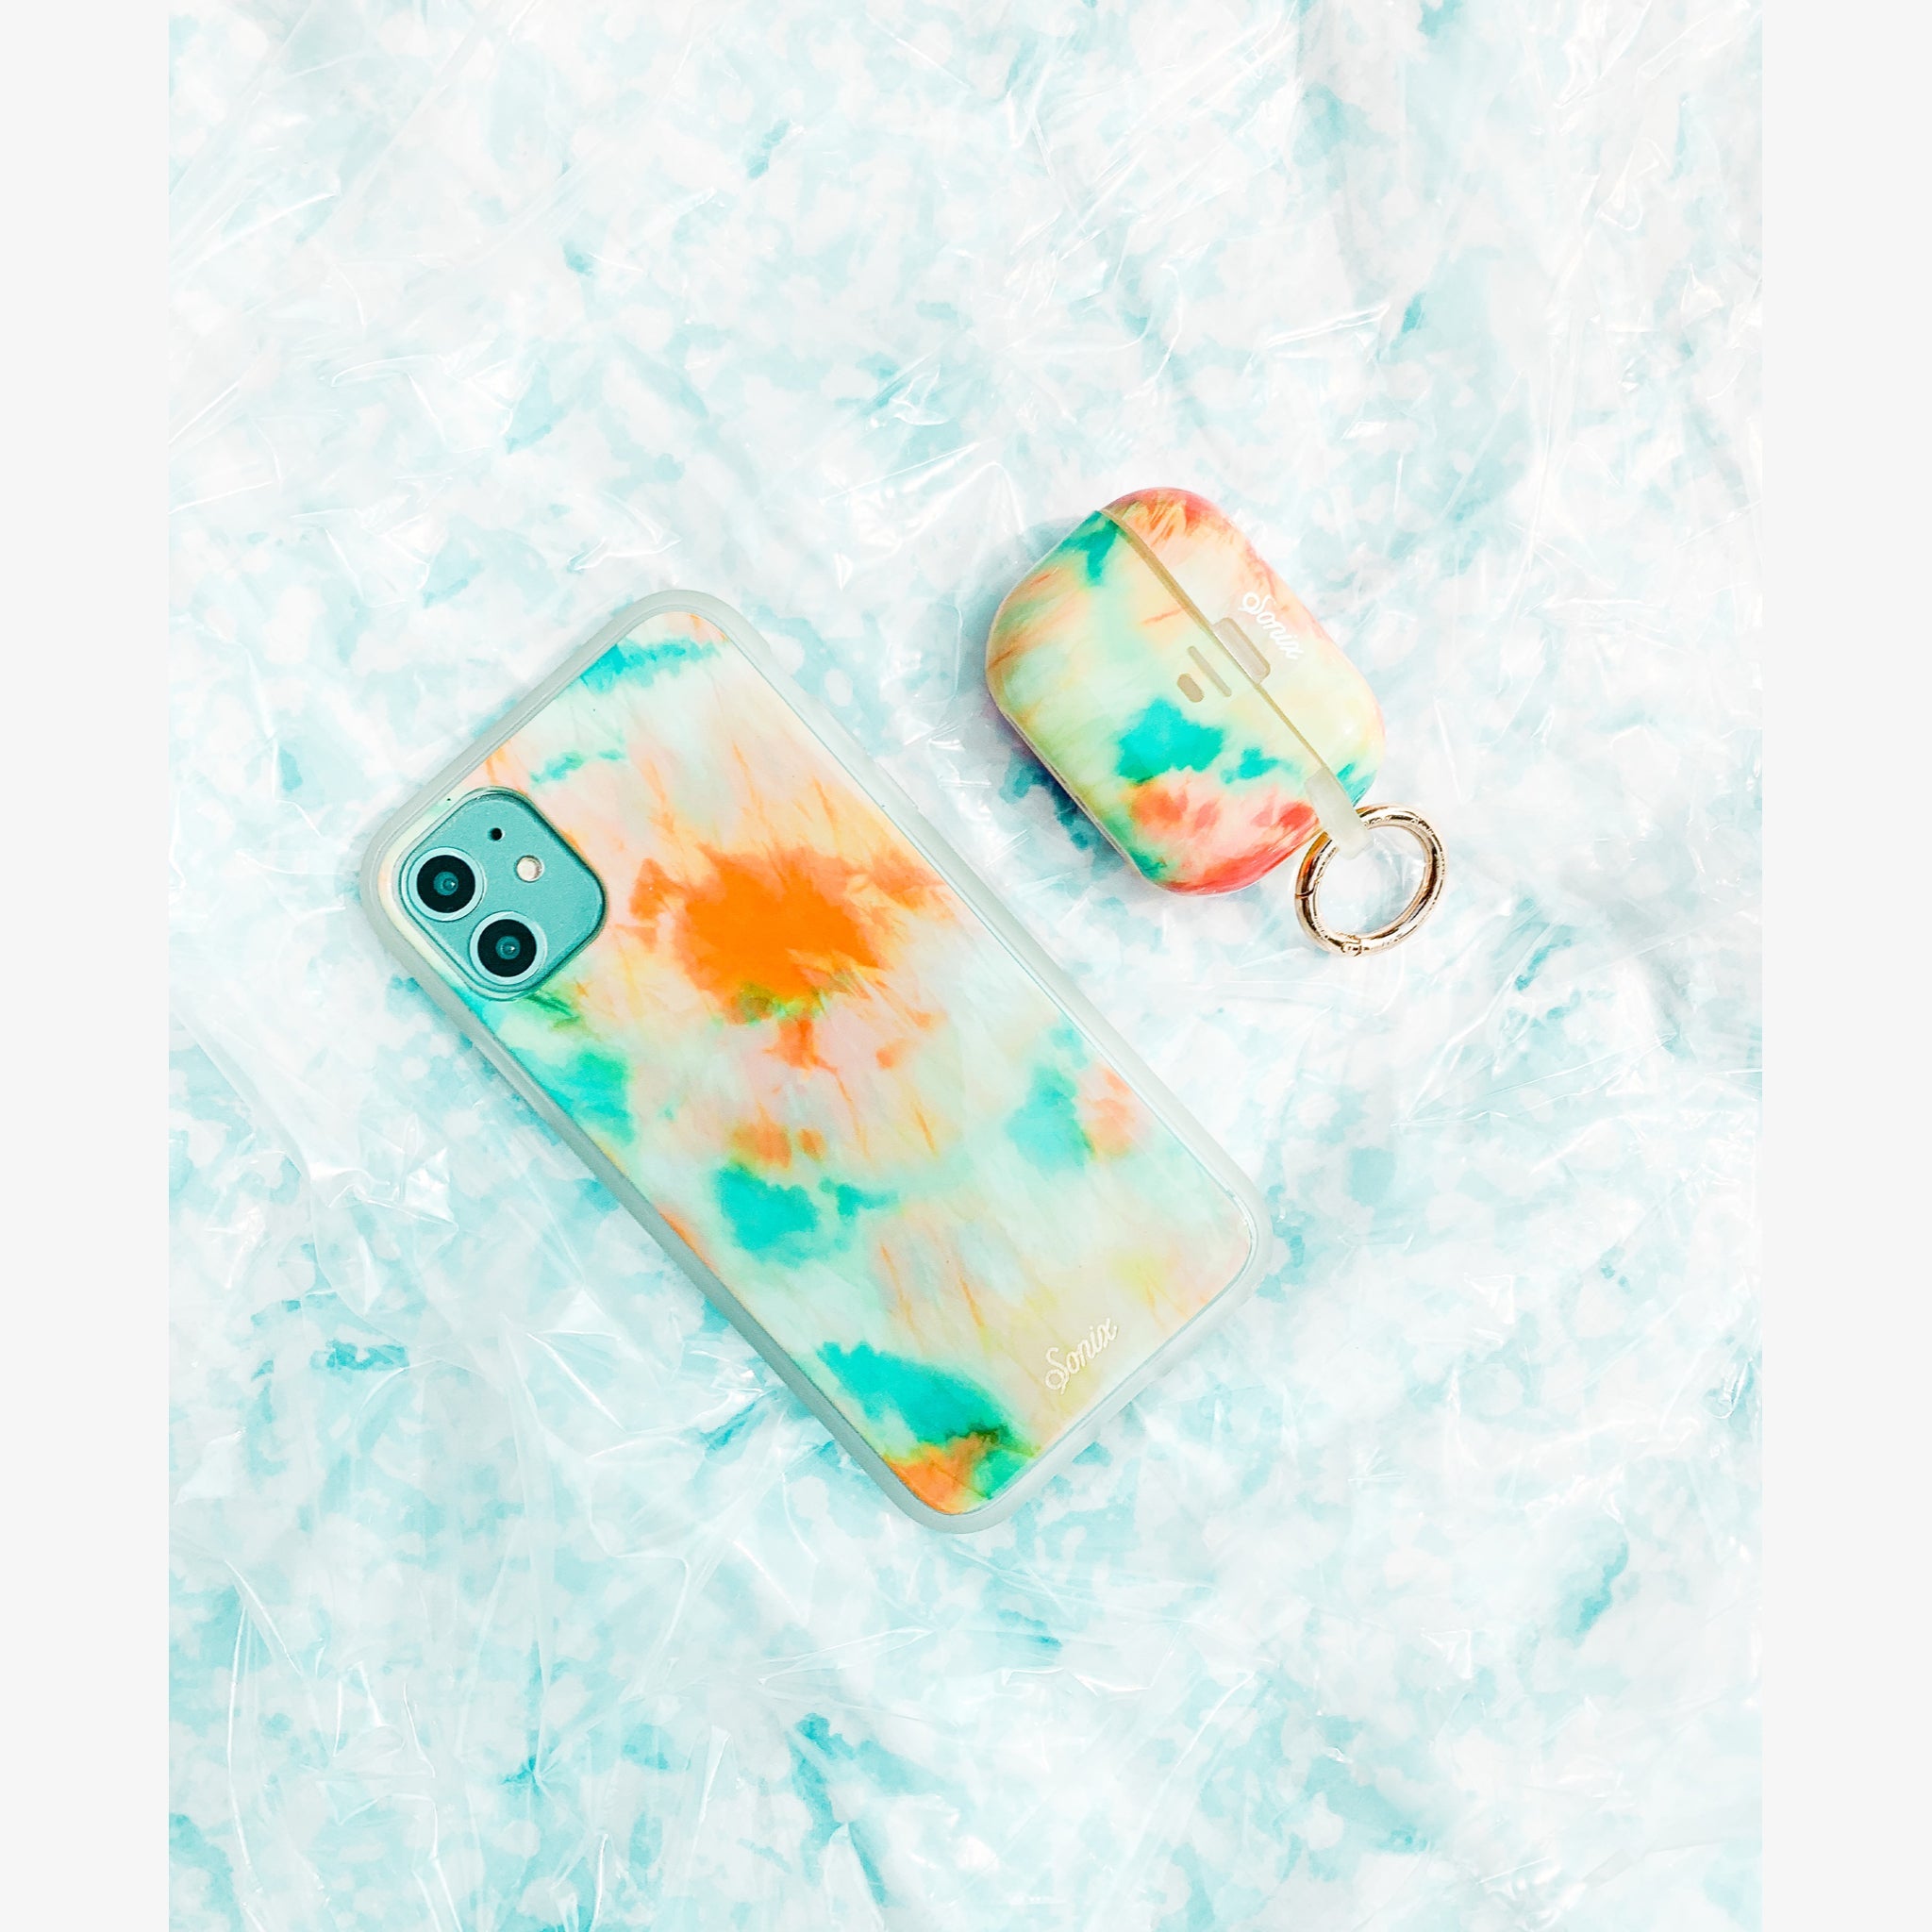 orange and blue tie-dye design that glows in the dark shown on an iphone and airpods